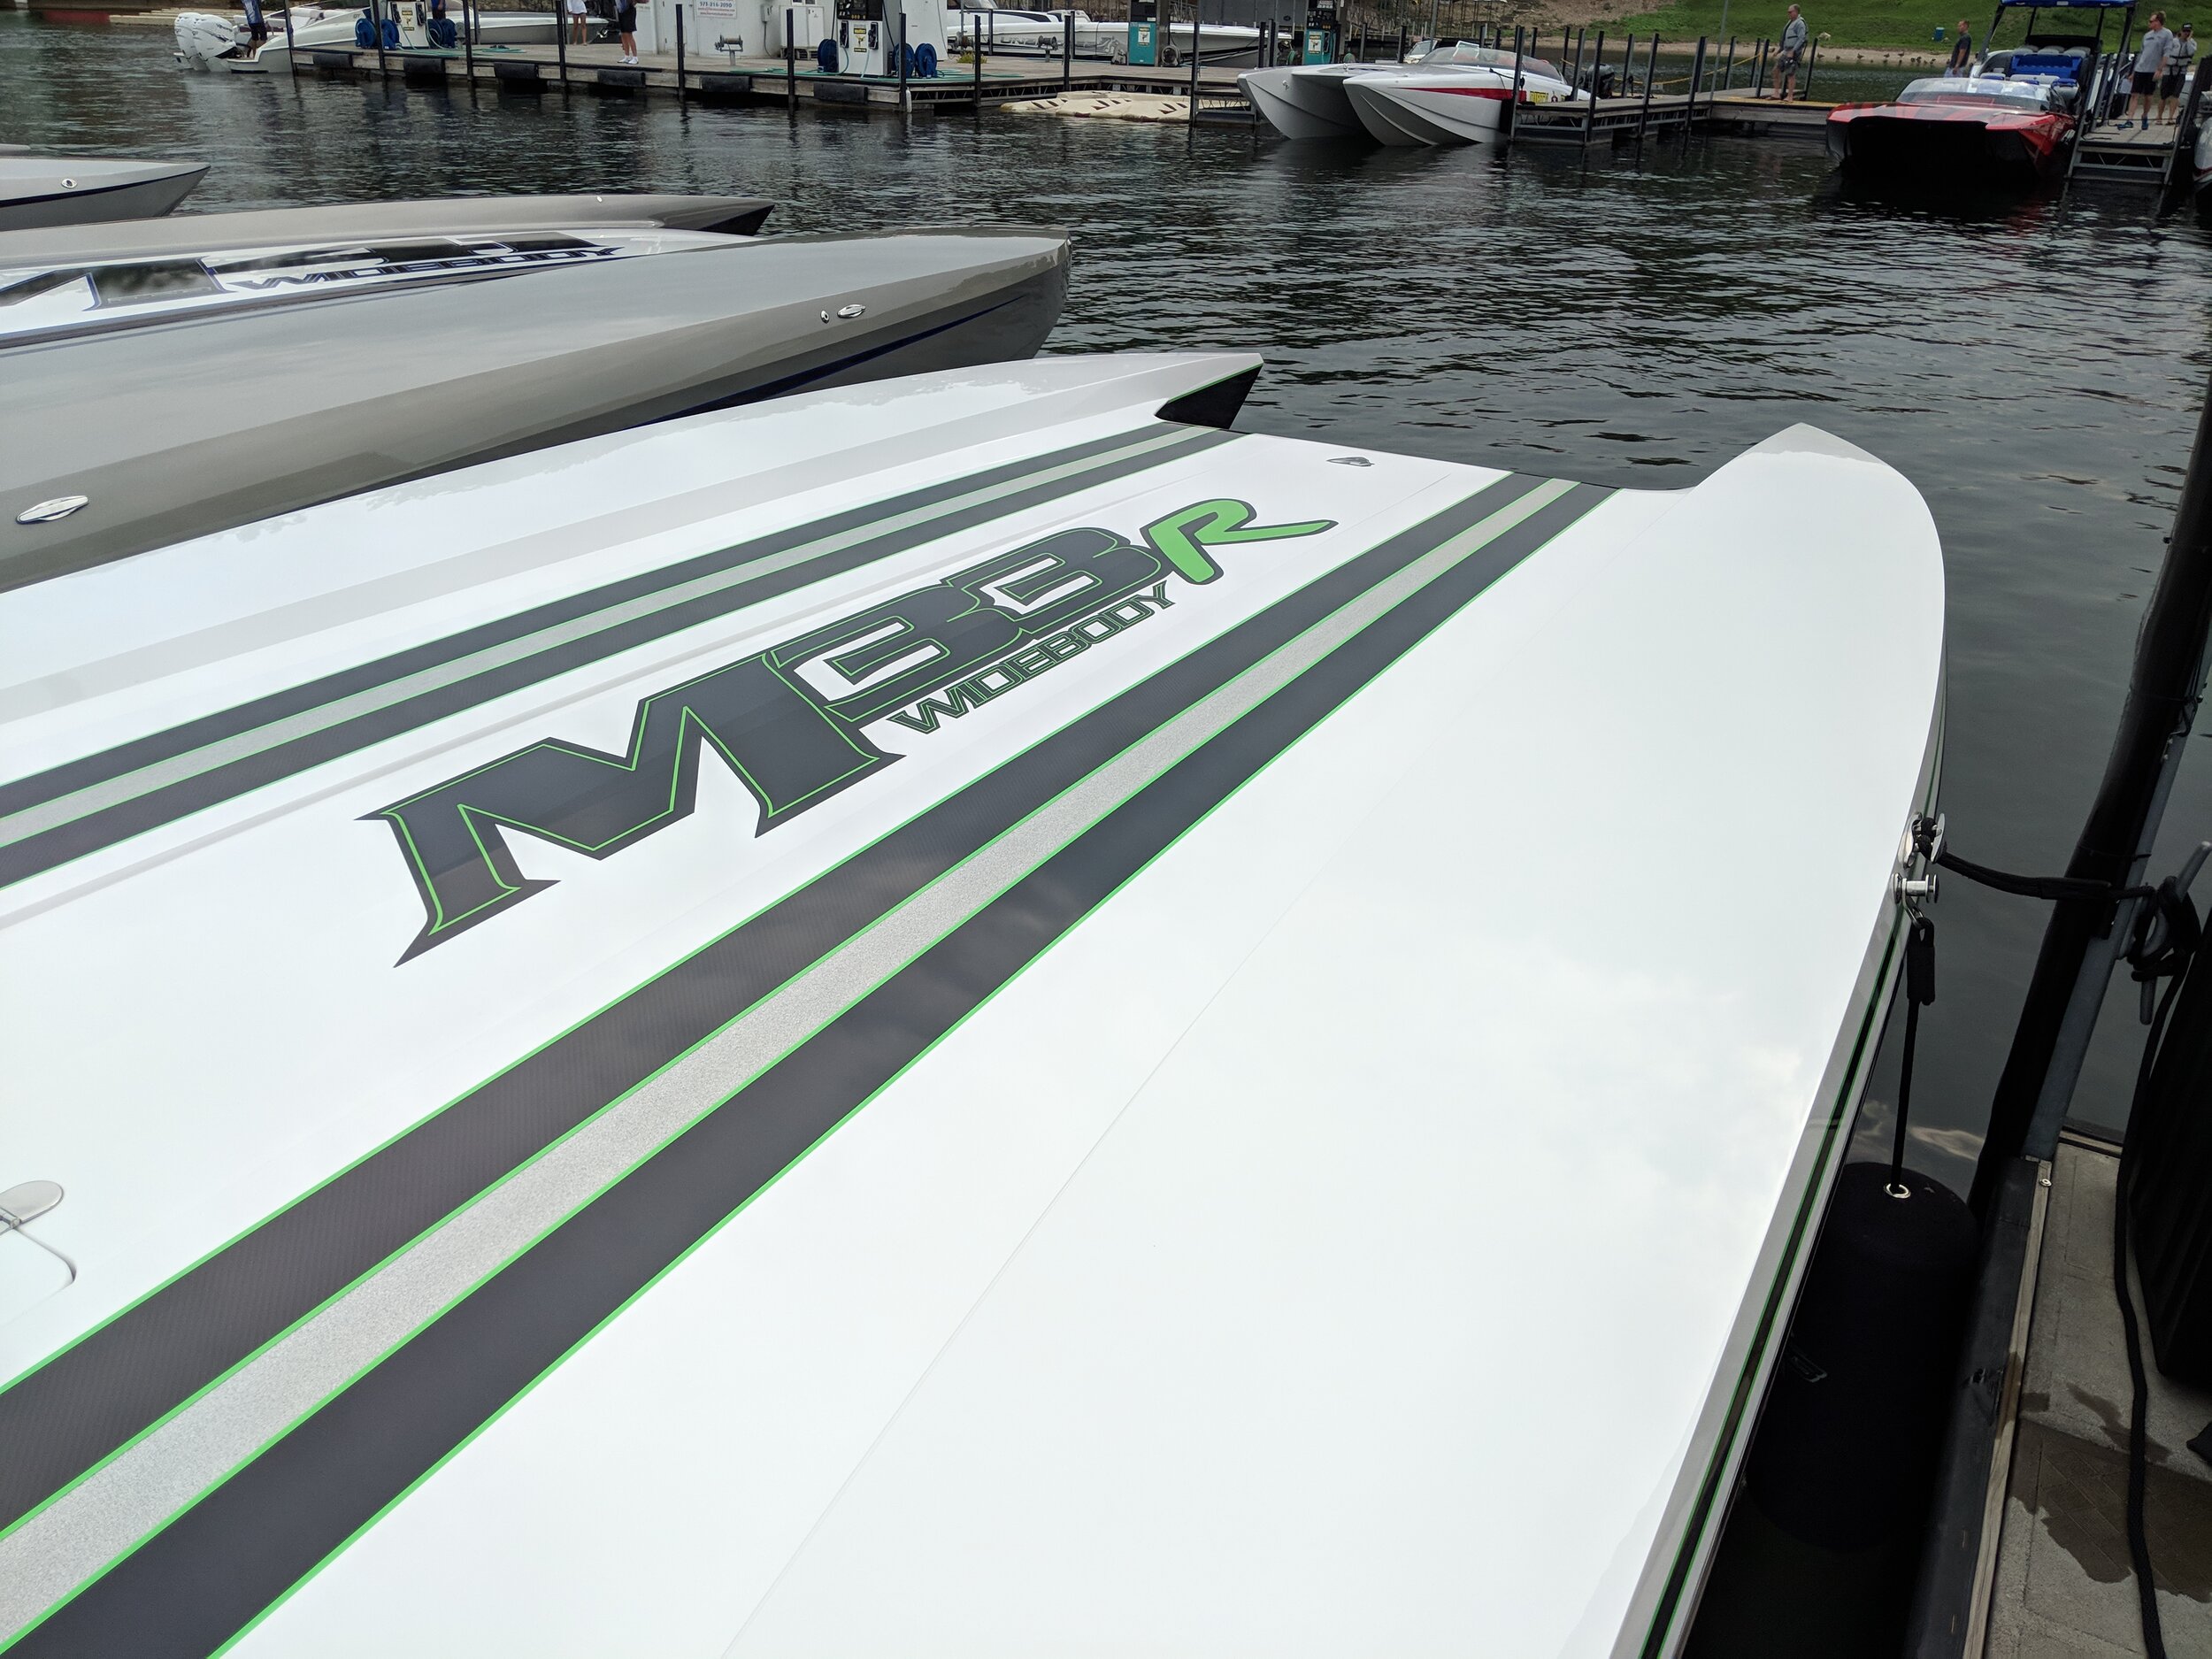 Modern Look: New Boats Featuring Less Graphics, Less Colors — Wave To Wave